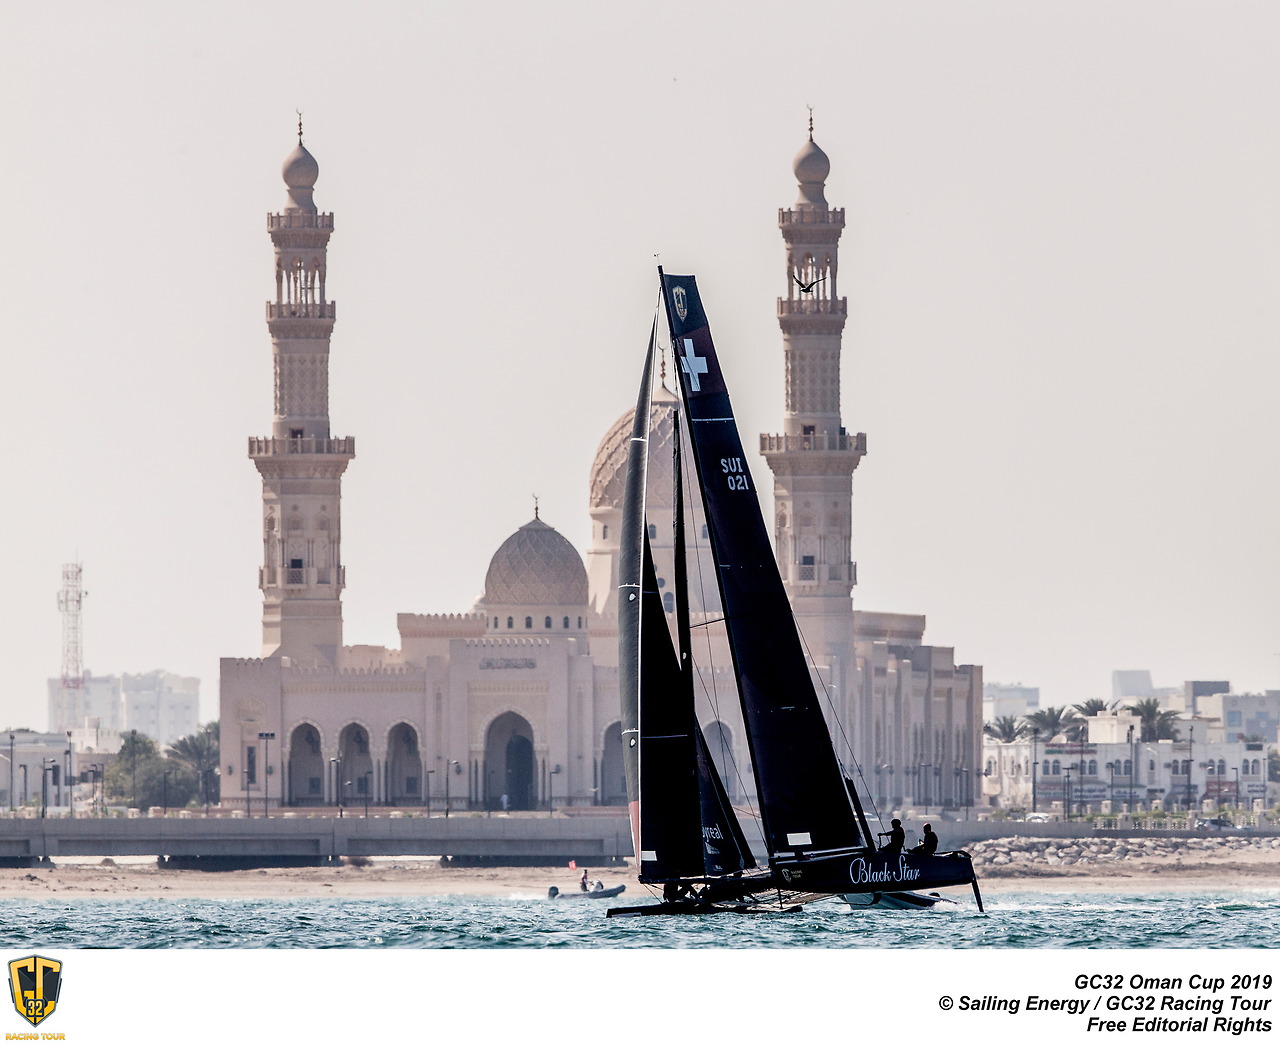  GC32Catamaran  Racing Tour  Finals  Muscat OMN  Day 2, Alinghi SUI stays on top but Zoulou FRA only one point back